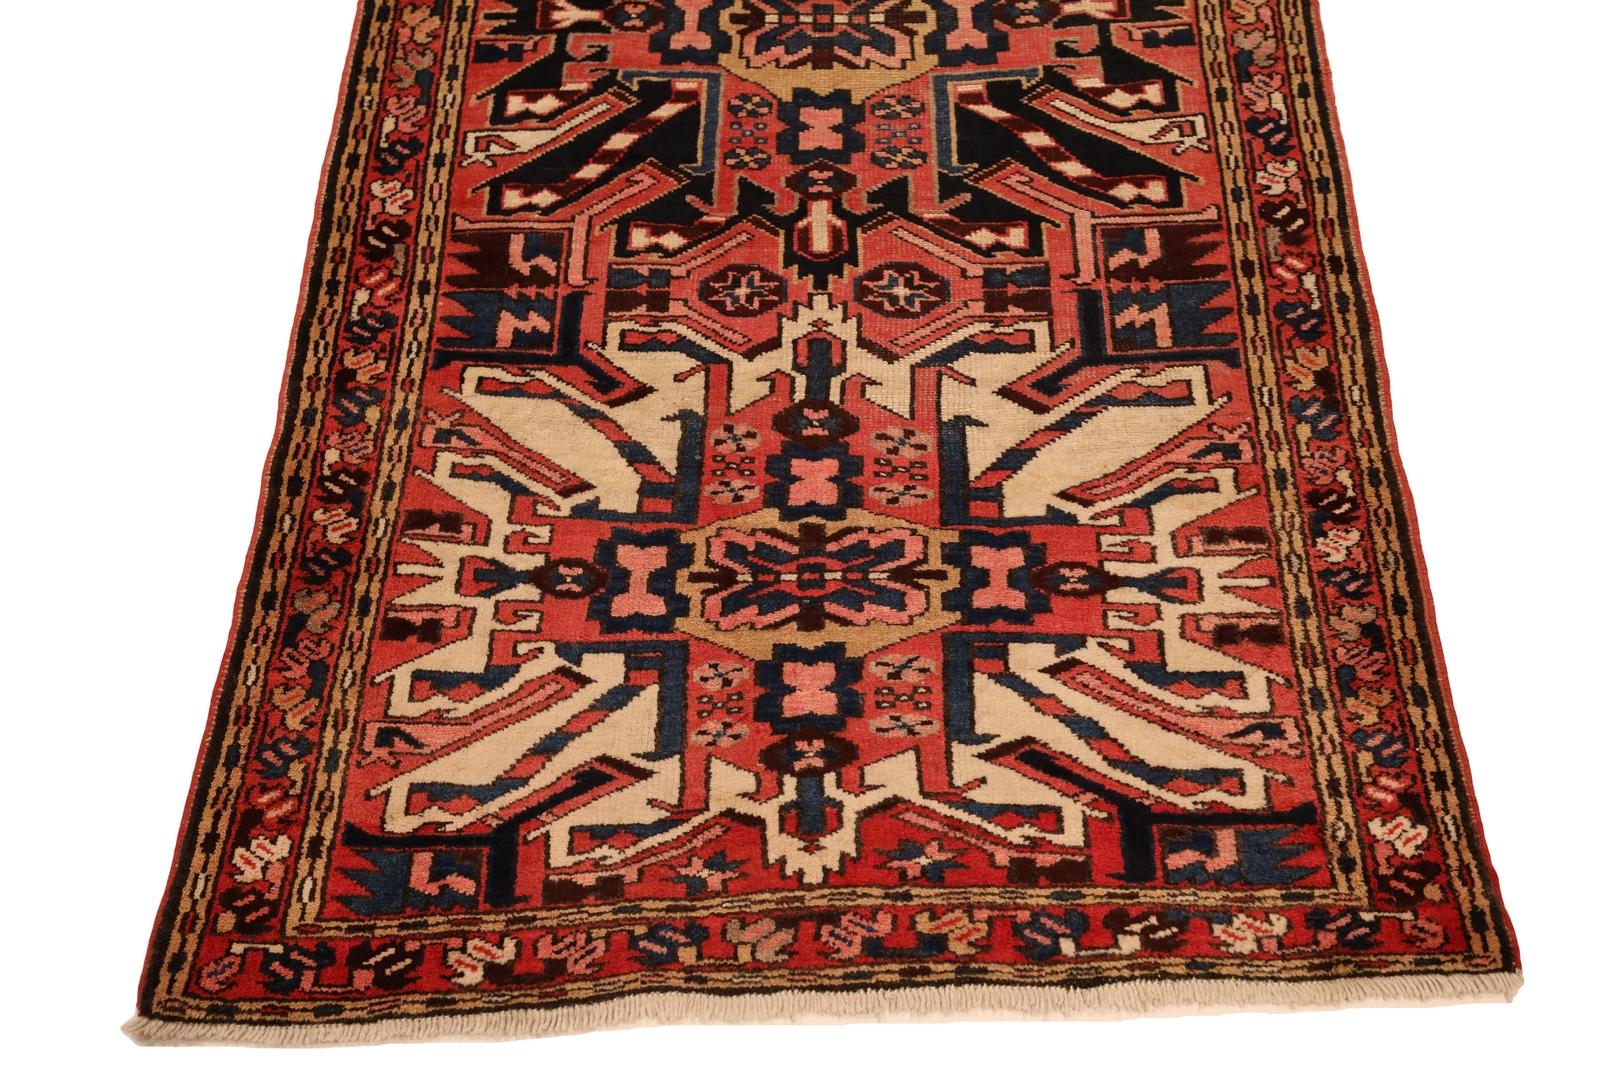 Hand-Knotted North-West Persian Runner - 3'5